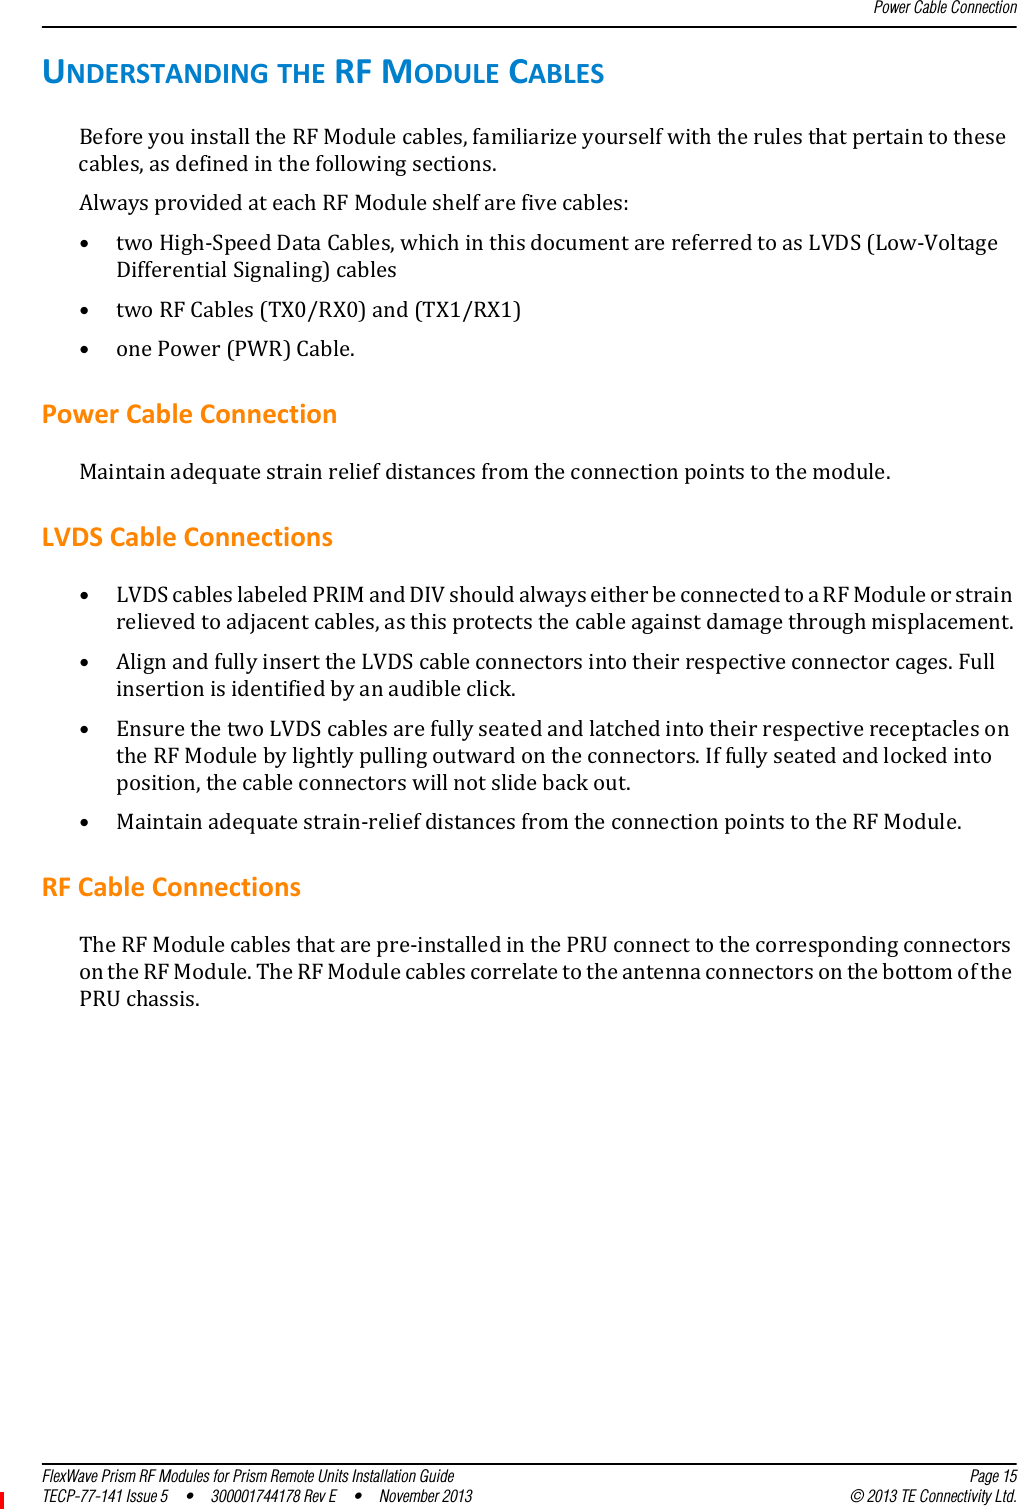 Power Cable ConnectionFlexWave Prism RF Modules for Prism Remote Units Installation Guide Page 15TECP-77-141 Issue 5  •  300001744178 Rev E  •  November 2013 © 2013 TE Connectivity Ltd.UNDERSTANDINGTHERFMODULECABLESBeforeyouinstalltheRFModulecables,familiarizeyourselfwiththerulesthatpertaintothesecables,asdefinedinthefollowingsections.AlwaysprovidedateachRFModuleshelfarefivecables:•twoHigh‐SpeedDataCables,whichinthisdocumentarereferredtoasLVDS(Low‐VoltageDifferentialSignaling)cables•twoRFCables(TX0/RX0)and(TX1/RX1)•onePower(PWR)Cable.PowerCableConnectionMaintainadequatestrainreliefdistancesfromtheconnectionpointstothemodule.LVDSCableConnections•LVDScableslabeledPRIMandDIVshouldalwayseitherbeconnectedtoaRFModuleorstrainrelievedtoadjacentcables,asthisprotectsthecableagainstdamagethroughmisplacement.•AlignandfullyinserttheLVDScableconnectorsintotheirrespectiveconnectorcages.Fullinsertionisidentifiedbyanaudibleclick.•EnsurethetwoLVDScablesarefullyseatedandlatchedintotheirrespectivereceptaclesontheRFModulebylightlypullingoutwardontheconnectors.Iffullyseatedandlockedintoposition,thecableconnectorswillnotslidebackout.•Maintainadequatestrain‐reliefdistancesfromtheconnectionpointstotheRFModule.RFCableConnectionsTheRFModulecablesthatarepre‐installedinthePRUconnecttothecorrespondingconnectorsontheRFModule.TheRFModulecablescorrelatetotheantennaconnectorsonthebottomofthePRUchassis.